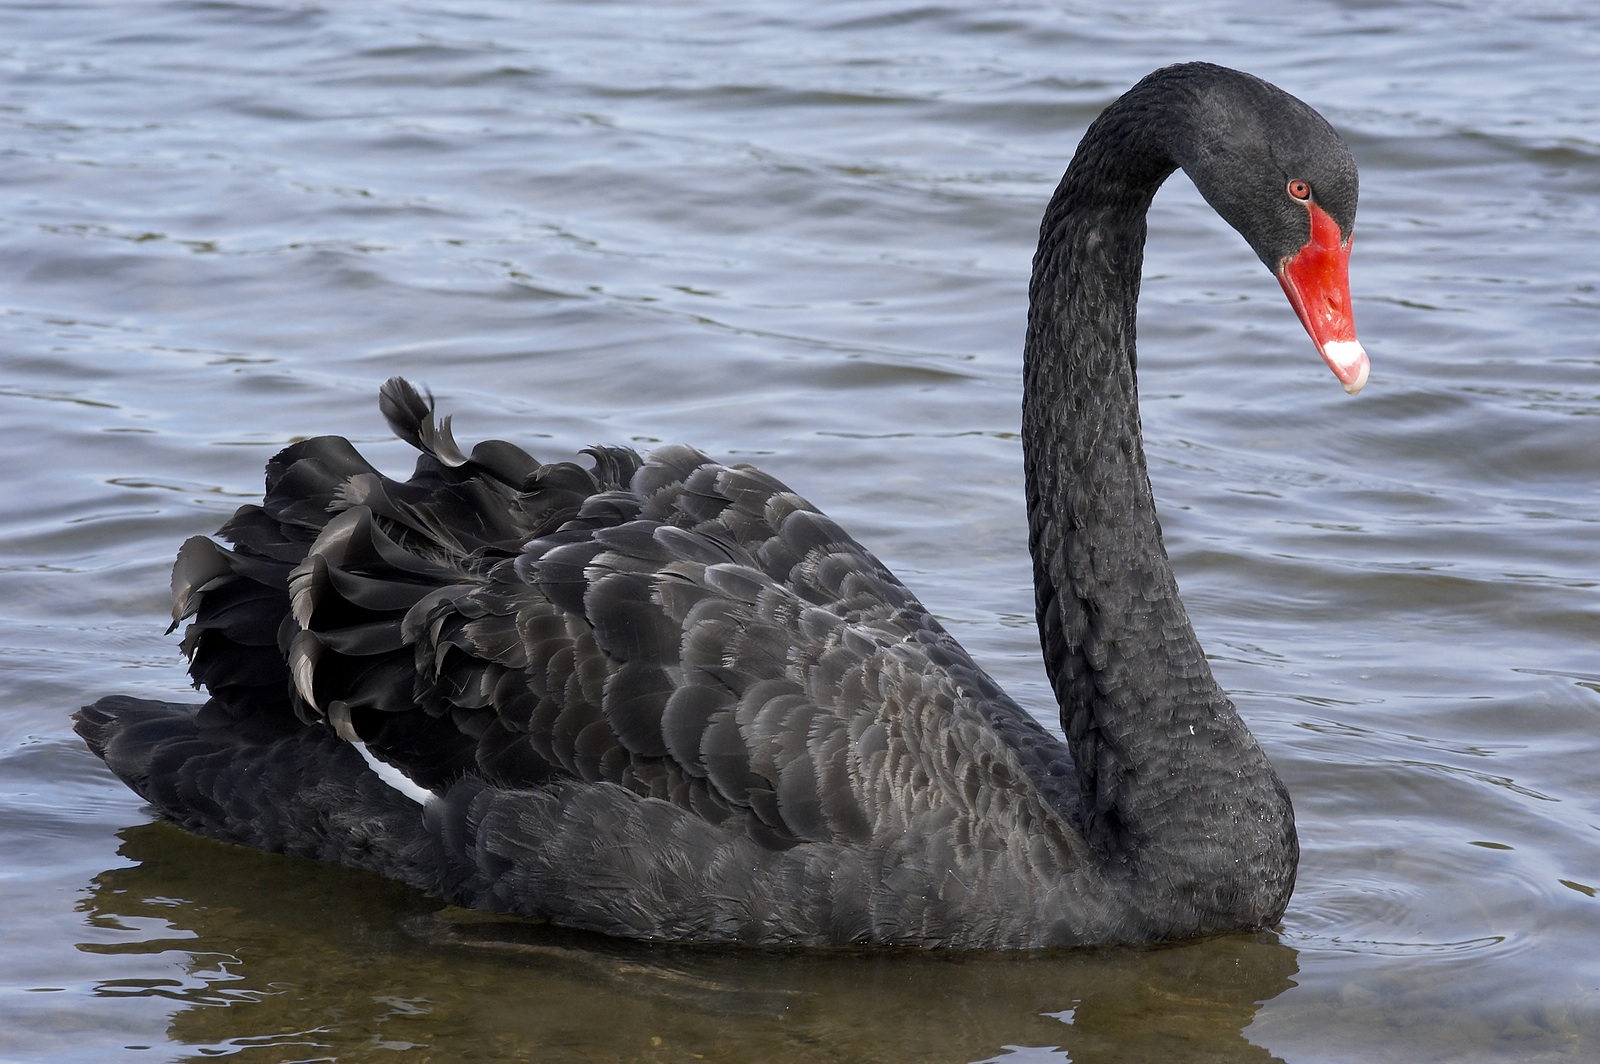 There are black swans on the River Ugie in Scotland.